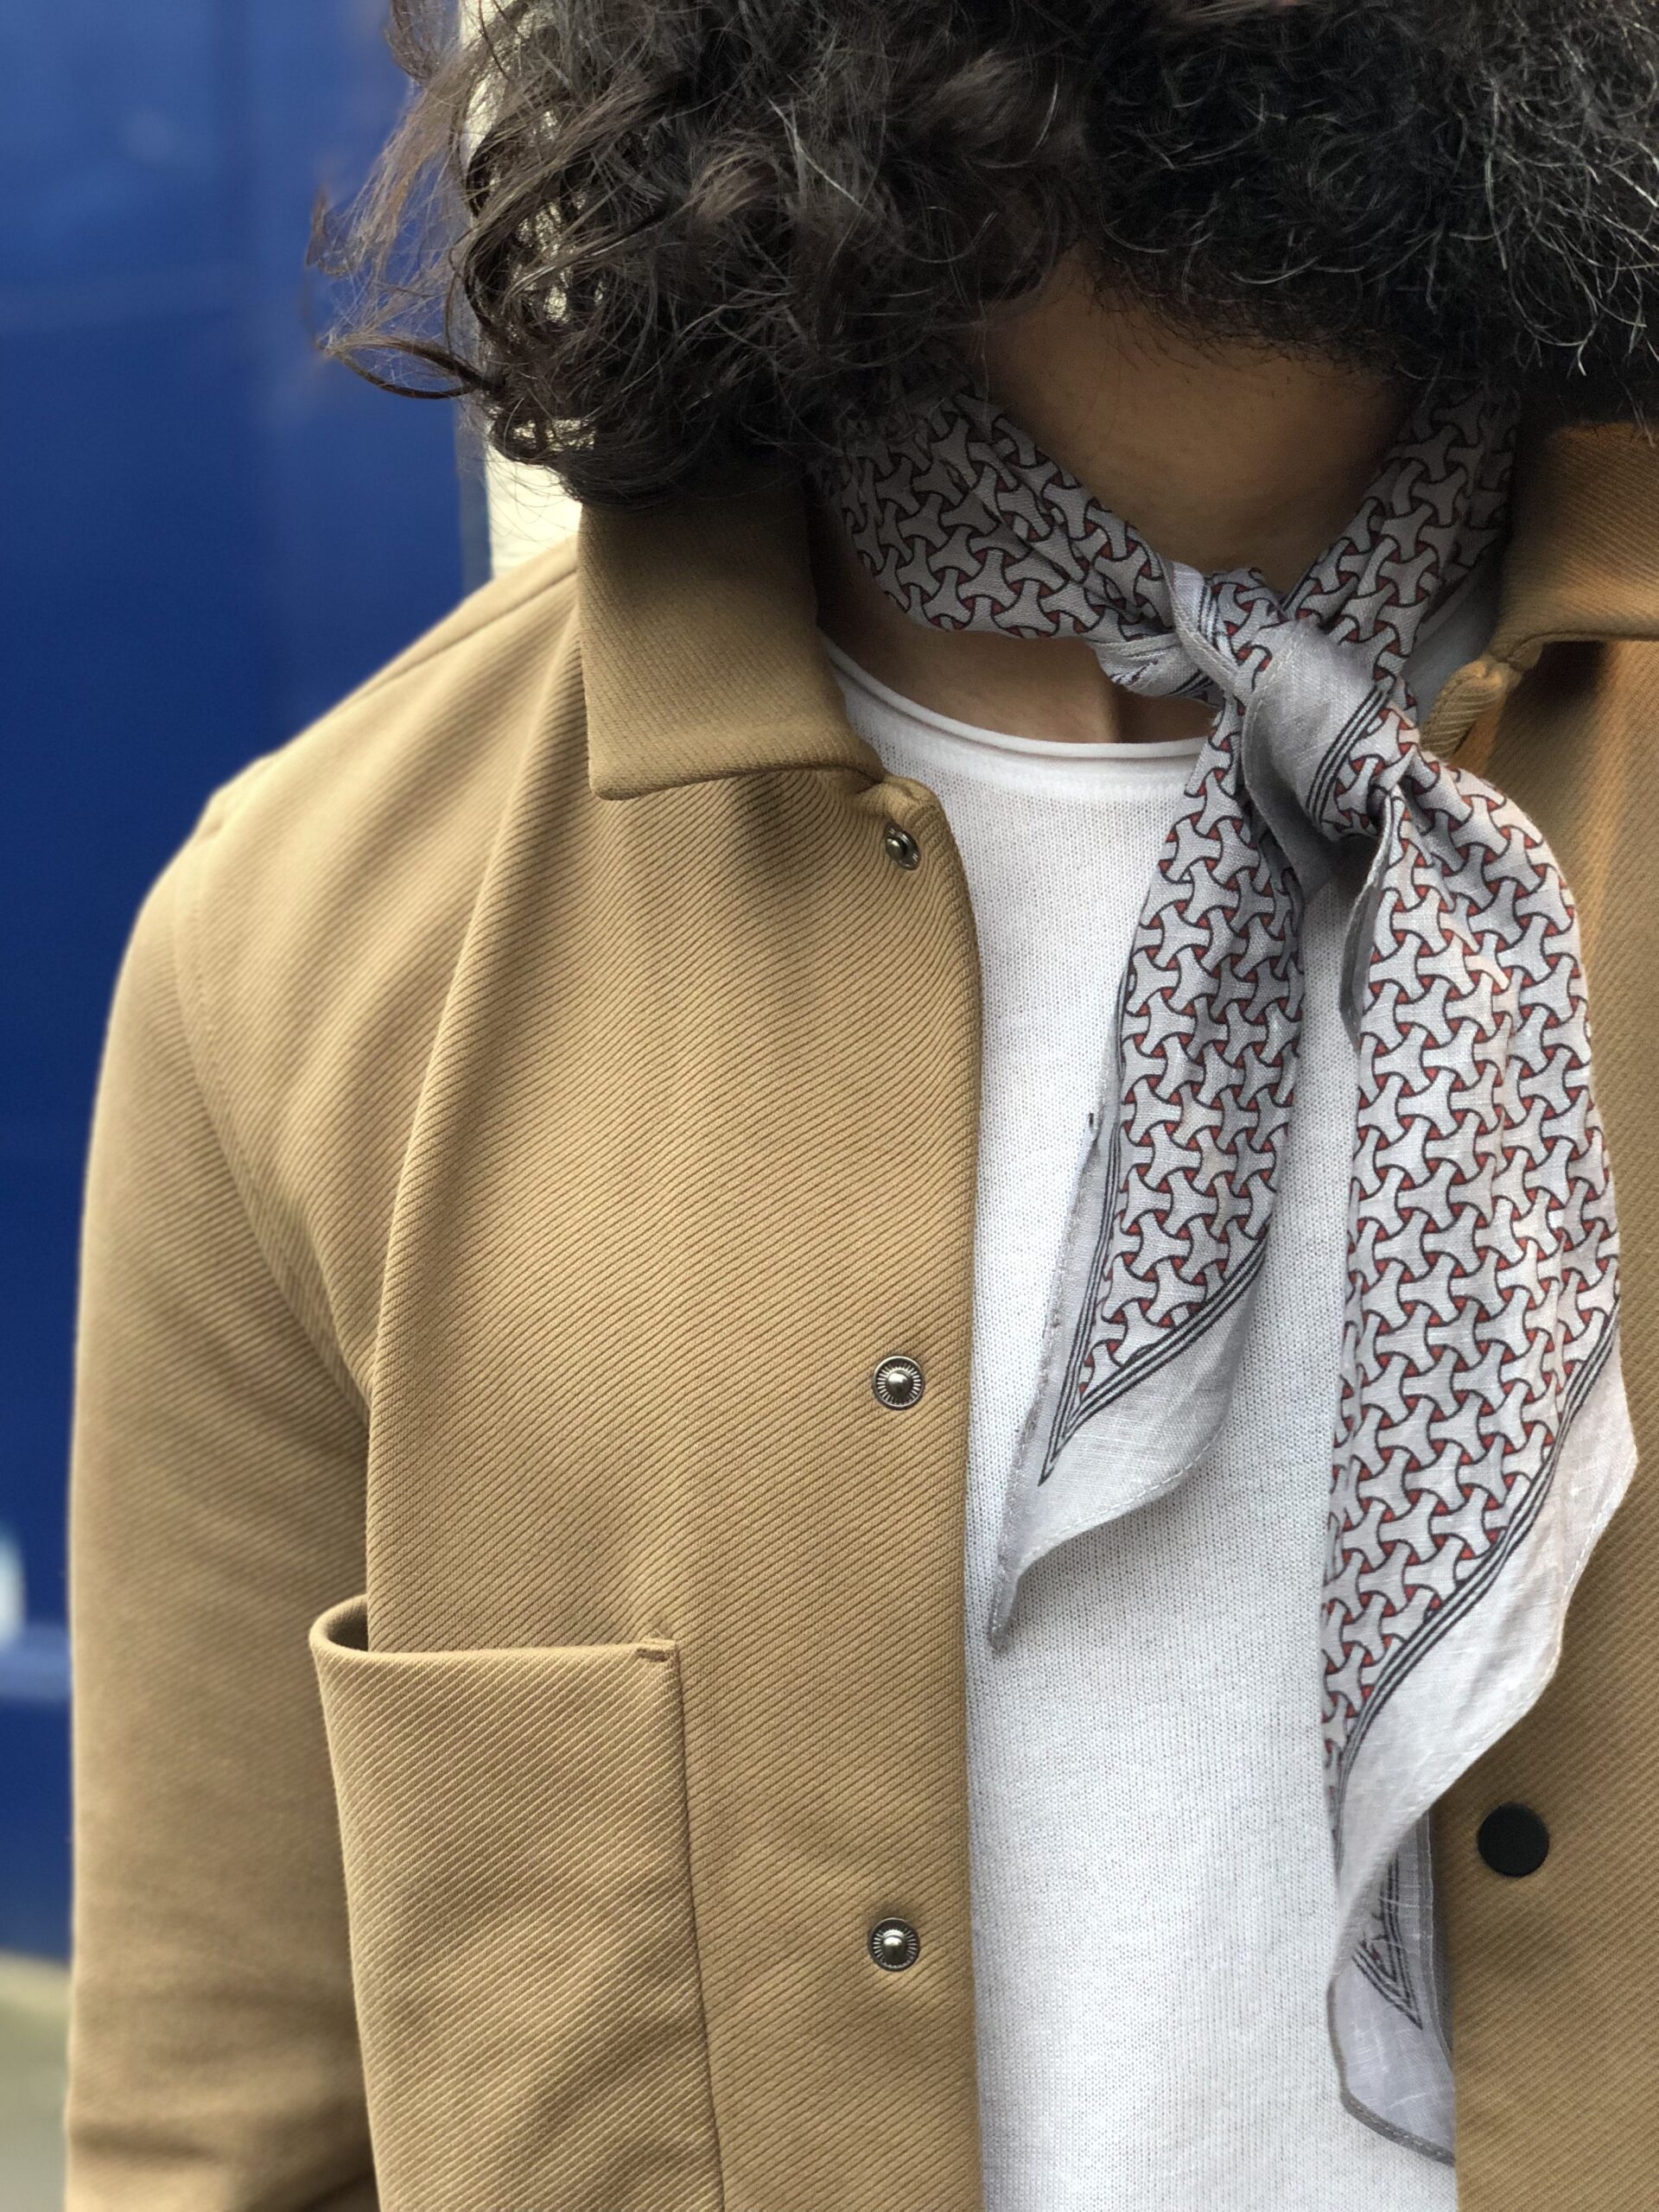 Stylish Ways to Incorporate Bandana Scarves Into Men’s Outfits